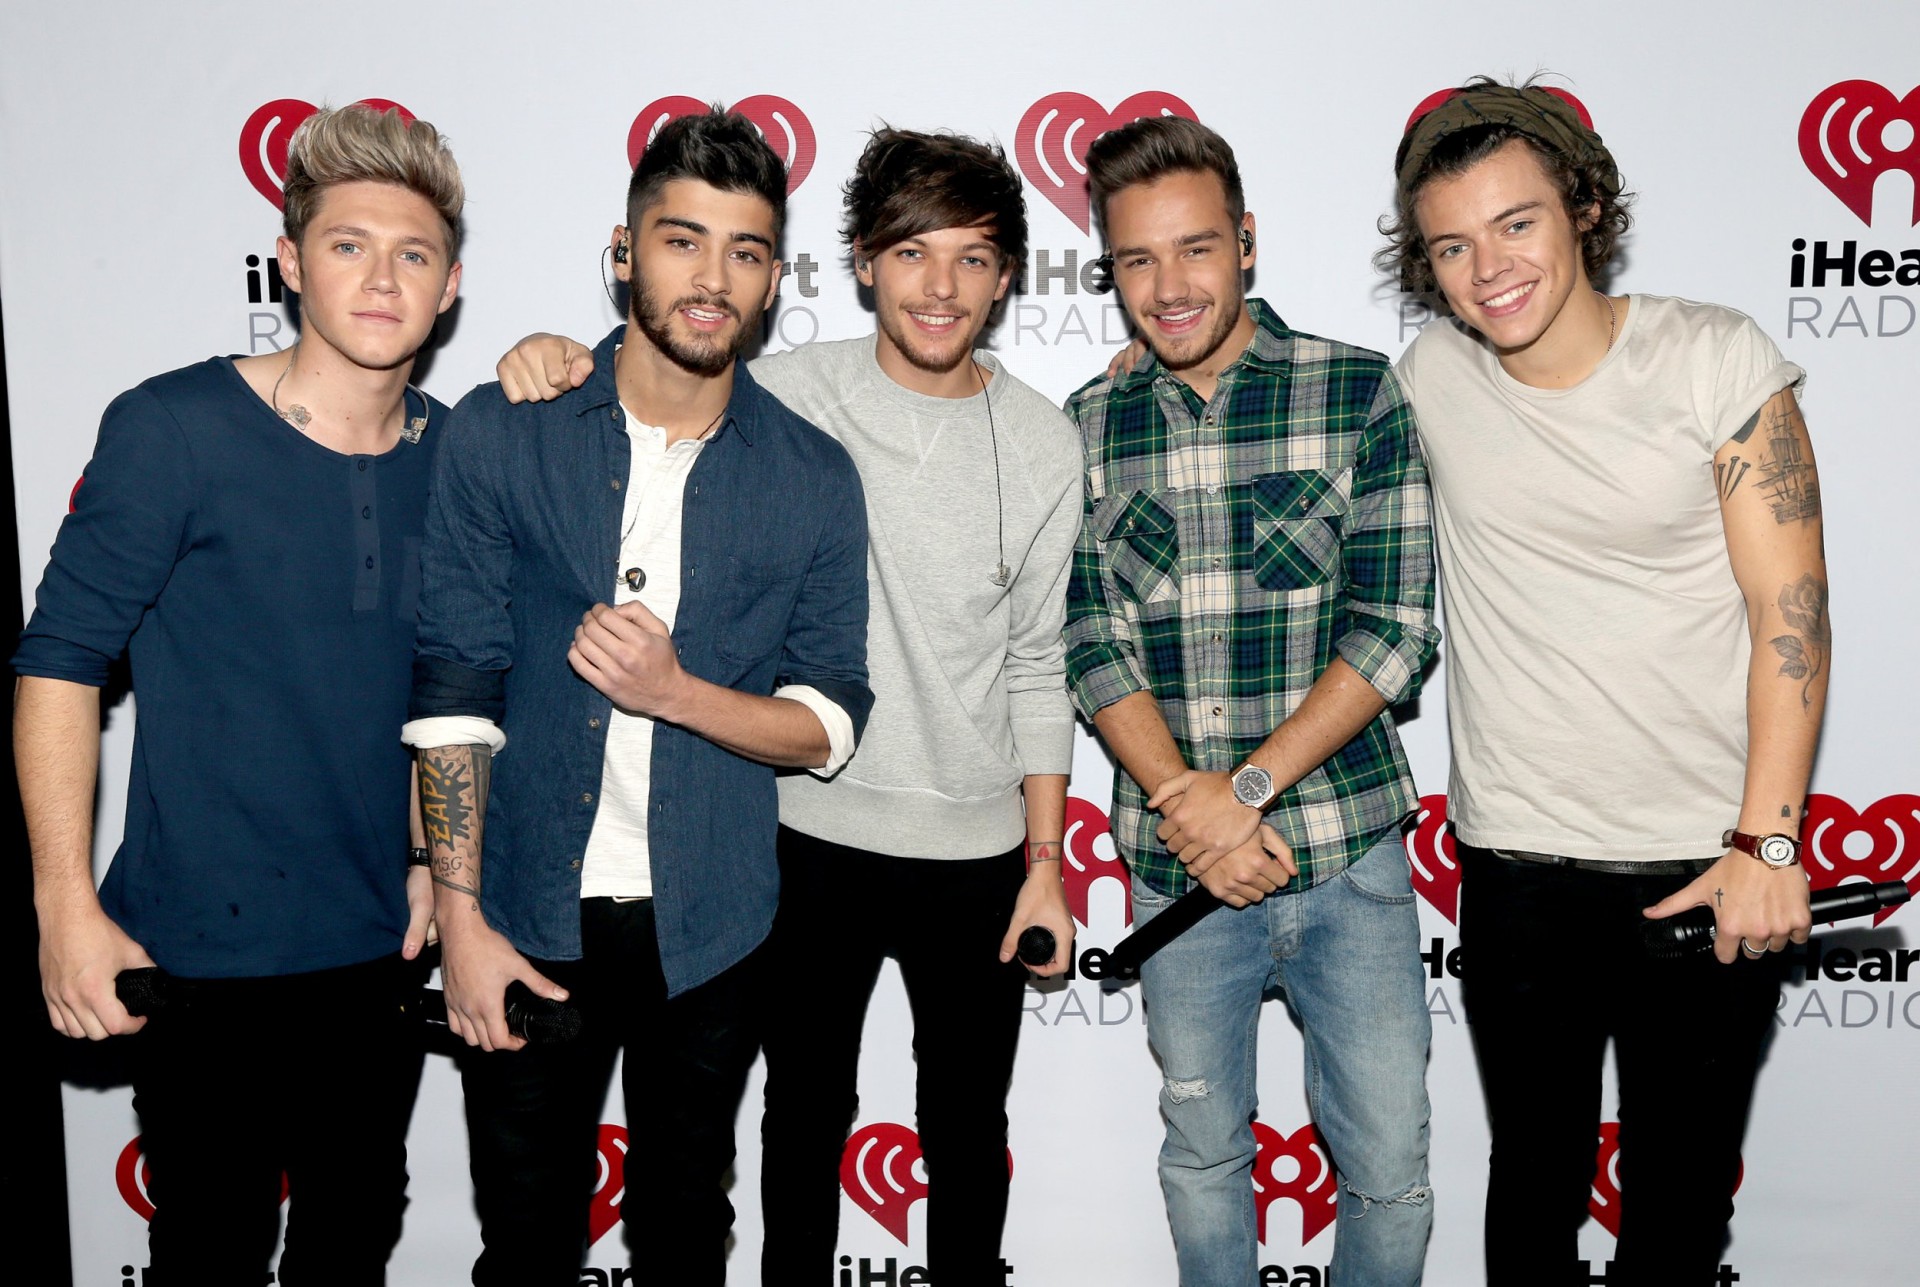 X Factor choreographer Brian Friedman claims One Direction's forming